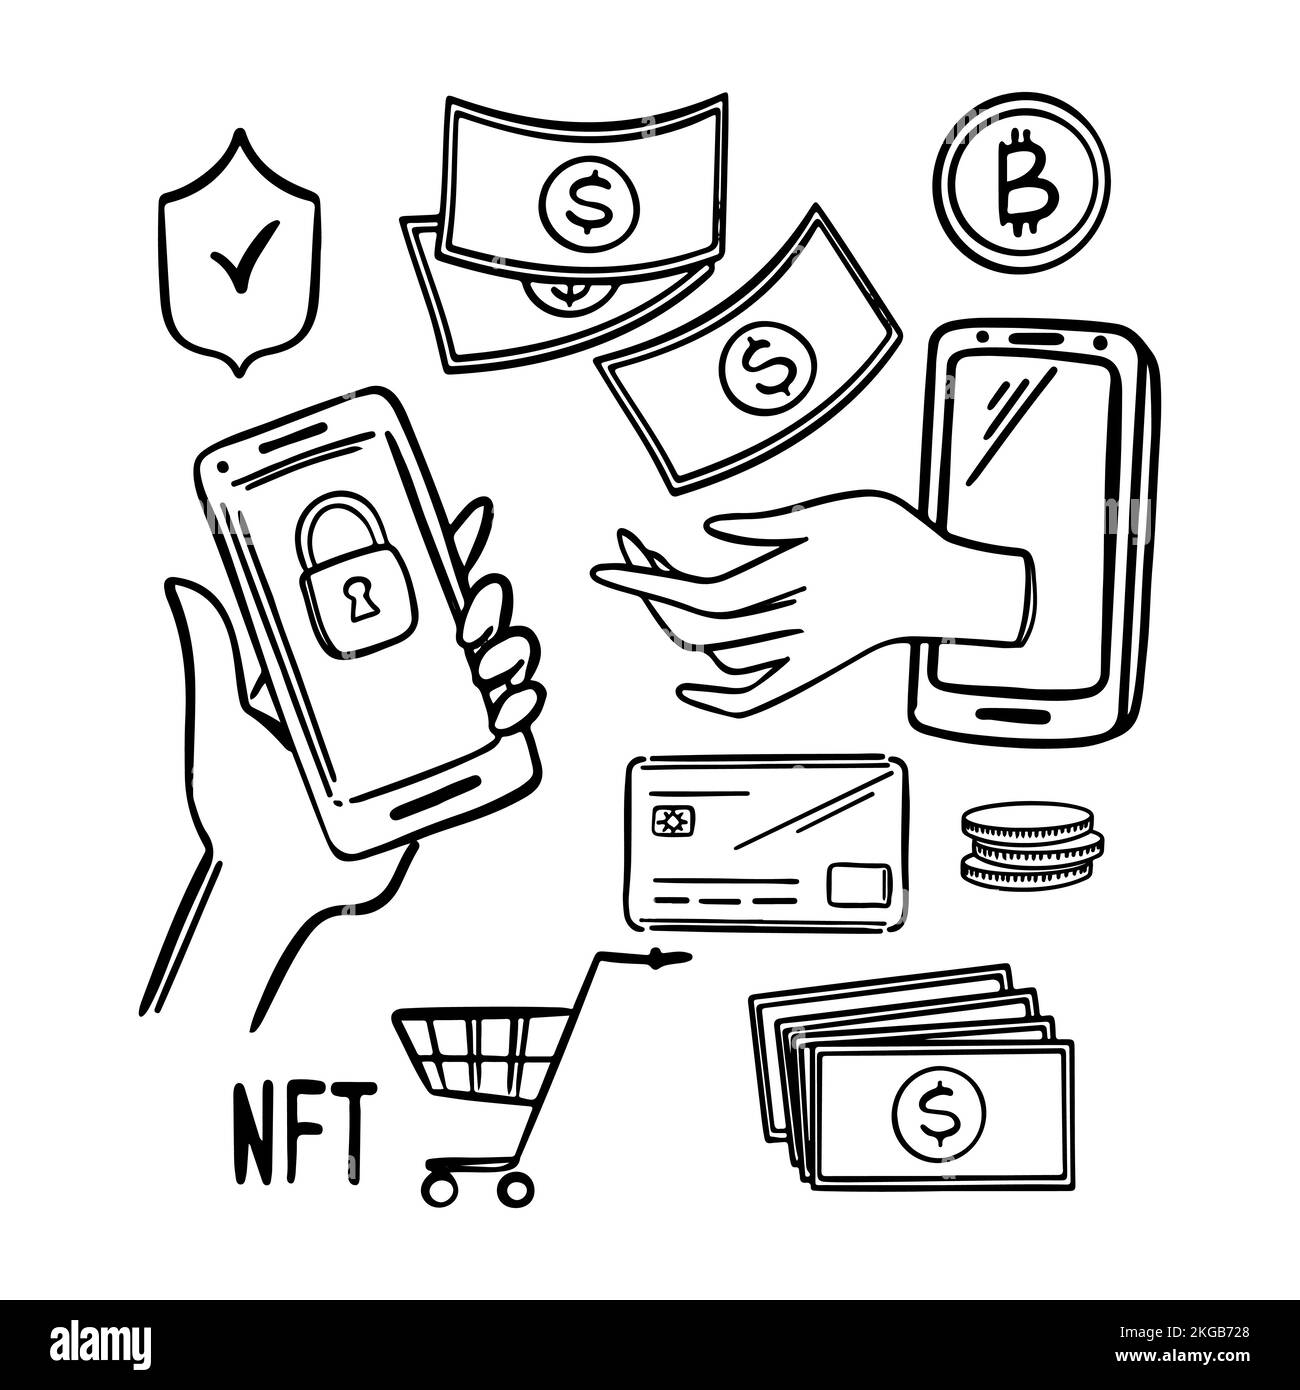 ECOMMERCE Digital Art Sale Online Marketplace With Non-fungible Token Currency Blockchain Unique Art Network Technology For Virtual Trade Crypto Store Stock Vector